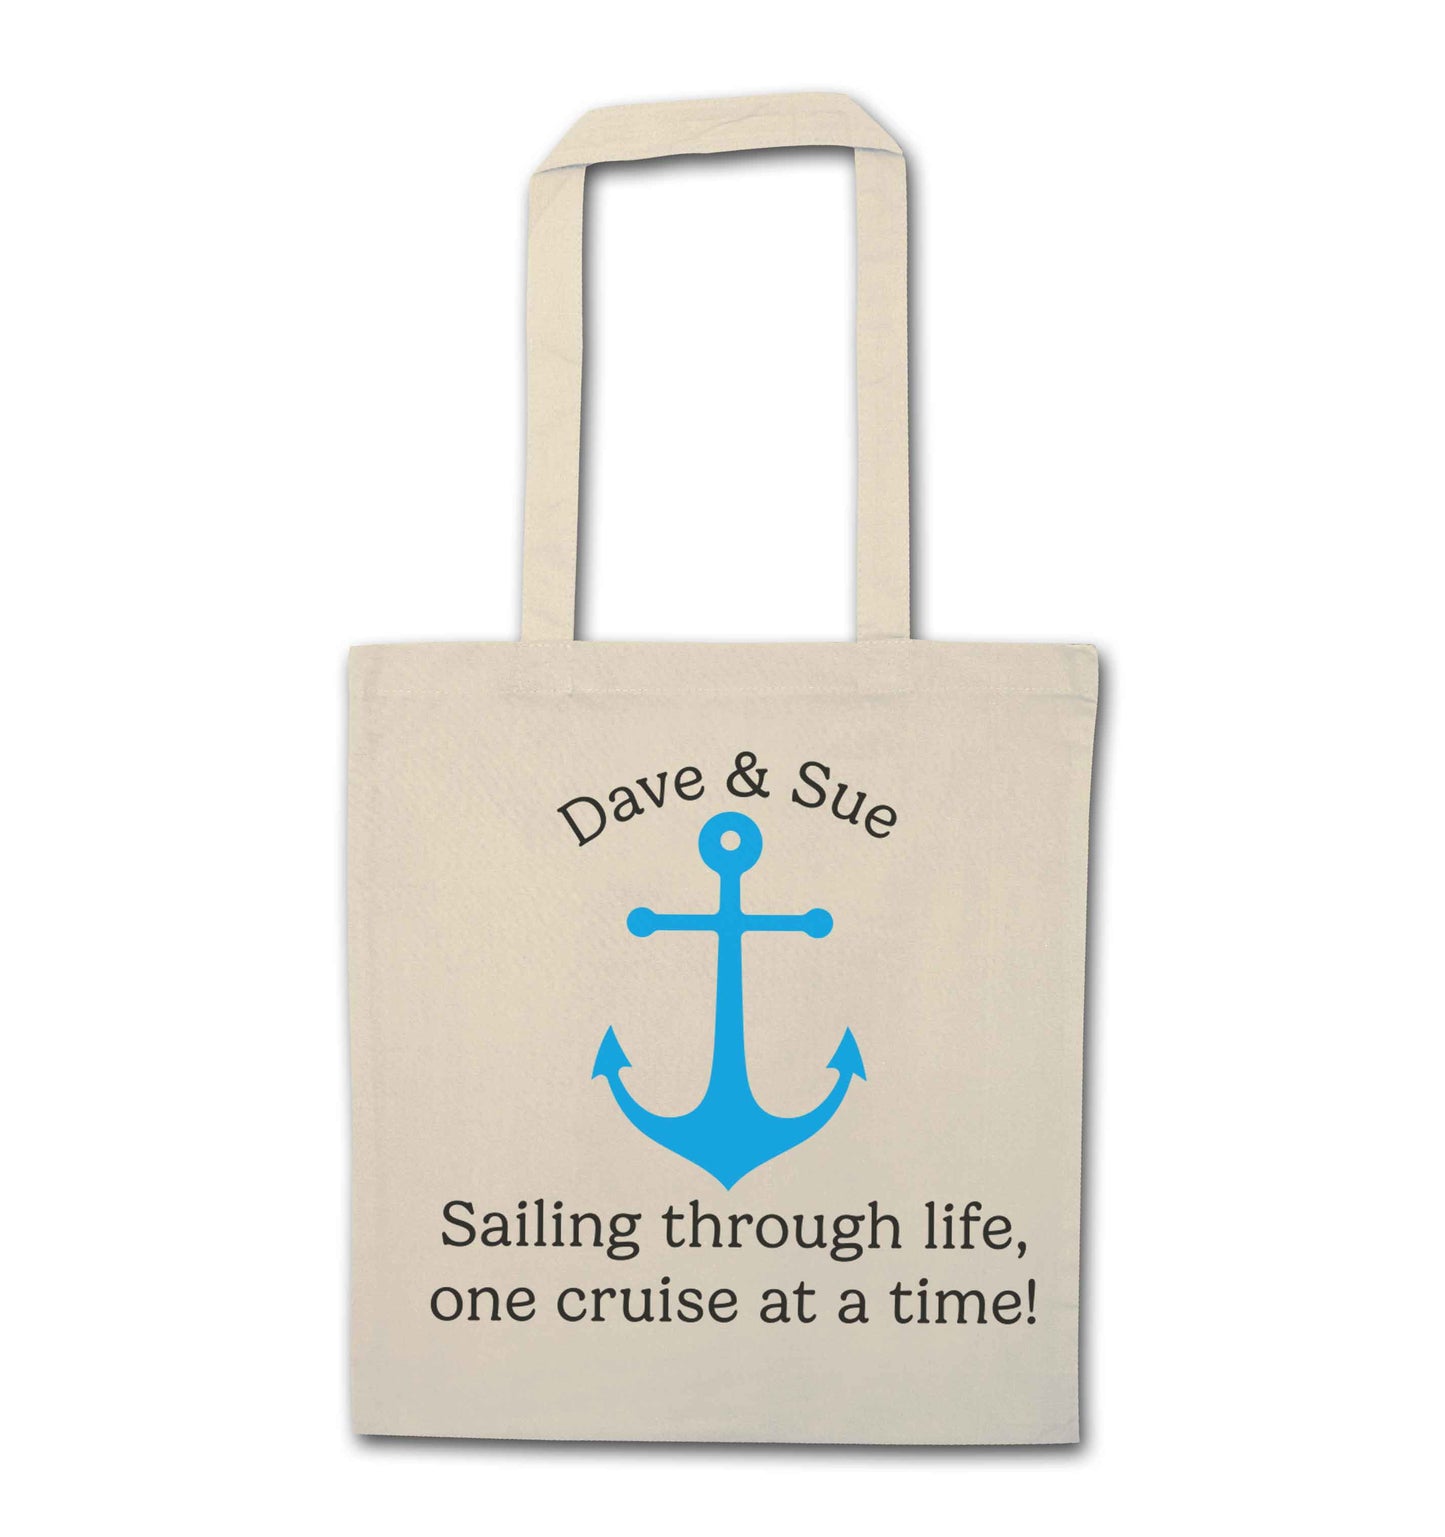 Sailing through life one cruise at a time - personalised natural tote bag